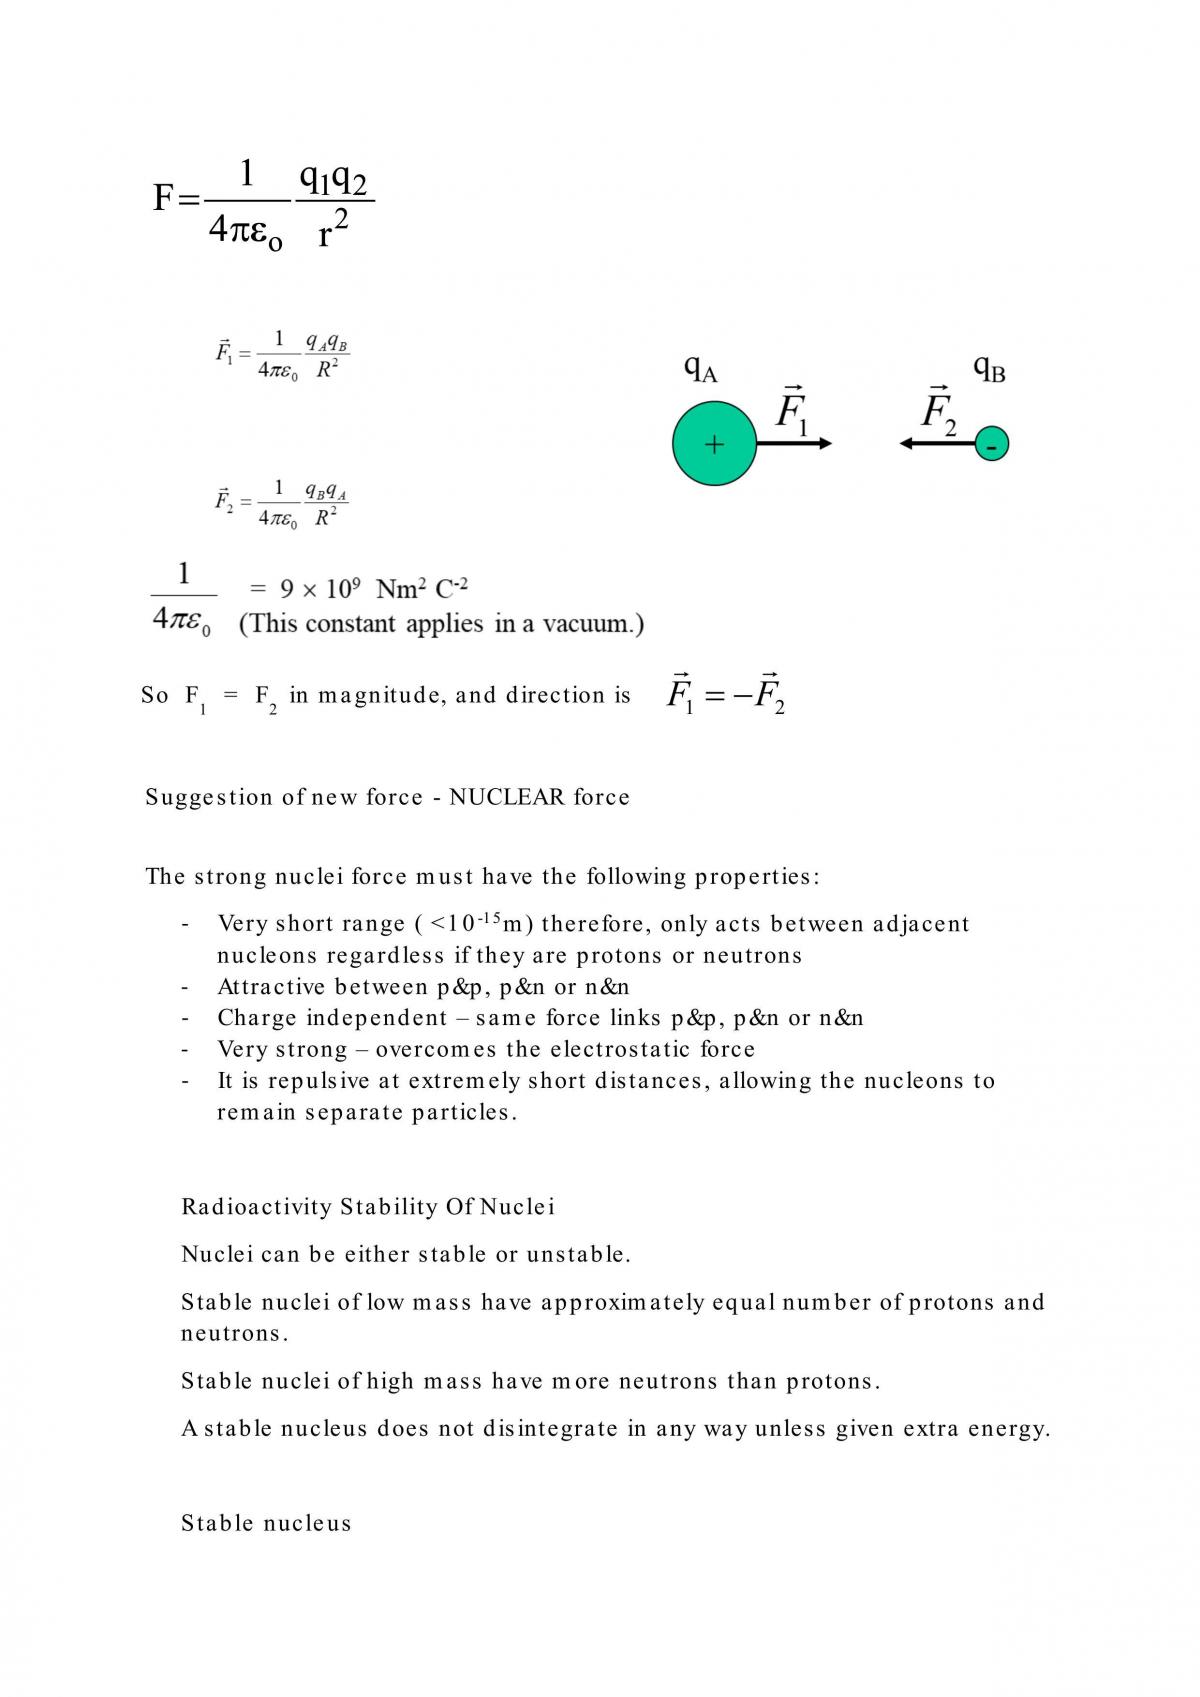 The Nucleus and Radioactivity - Notes  - Page 4